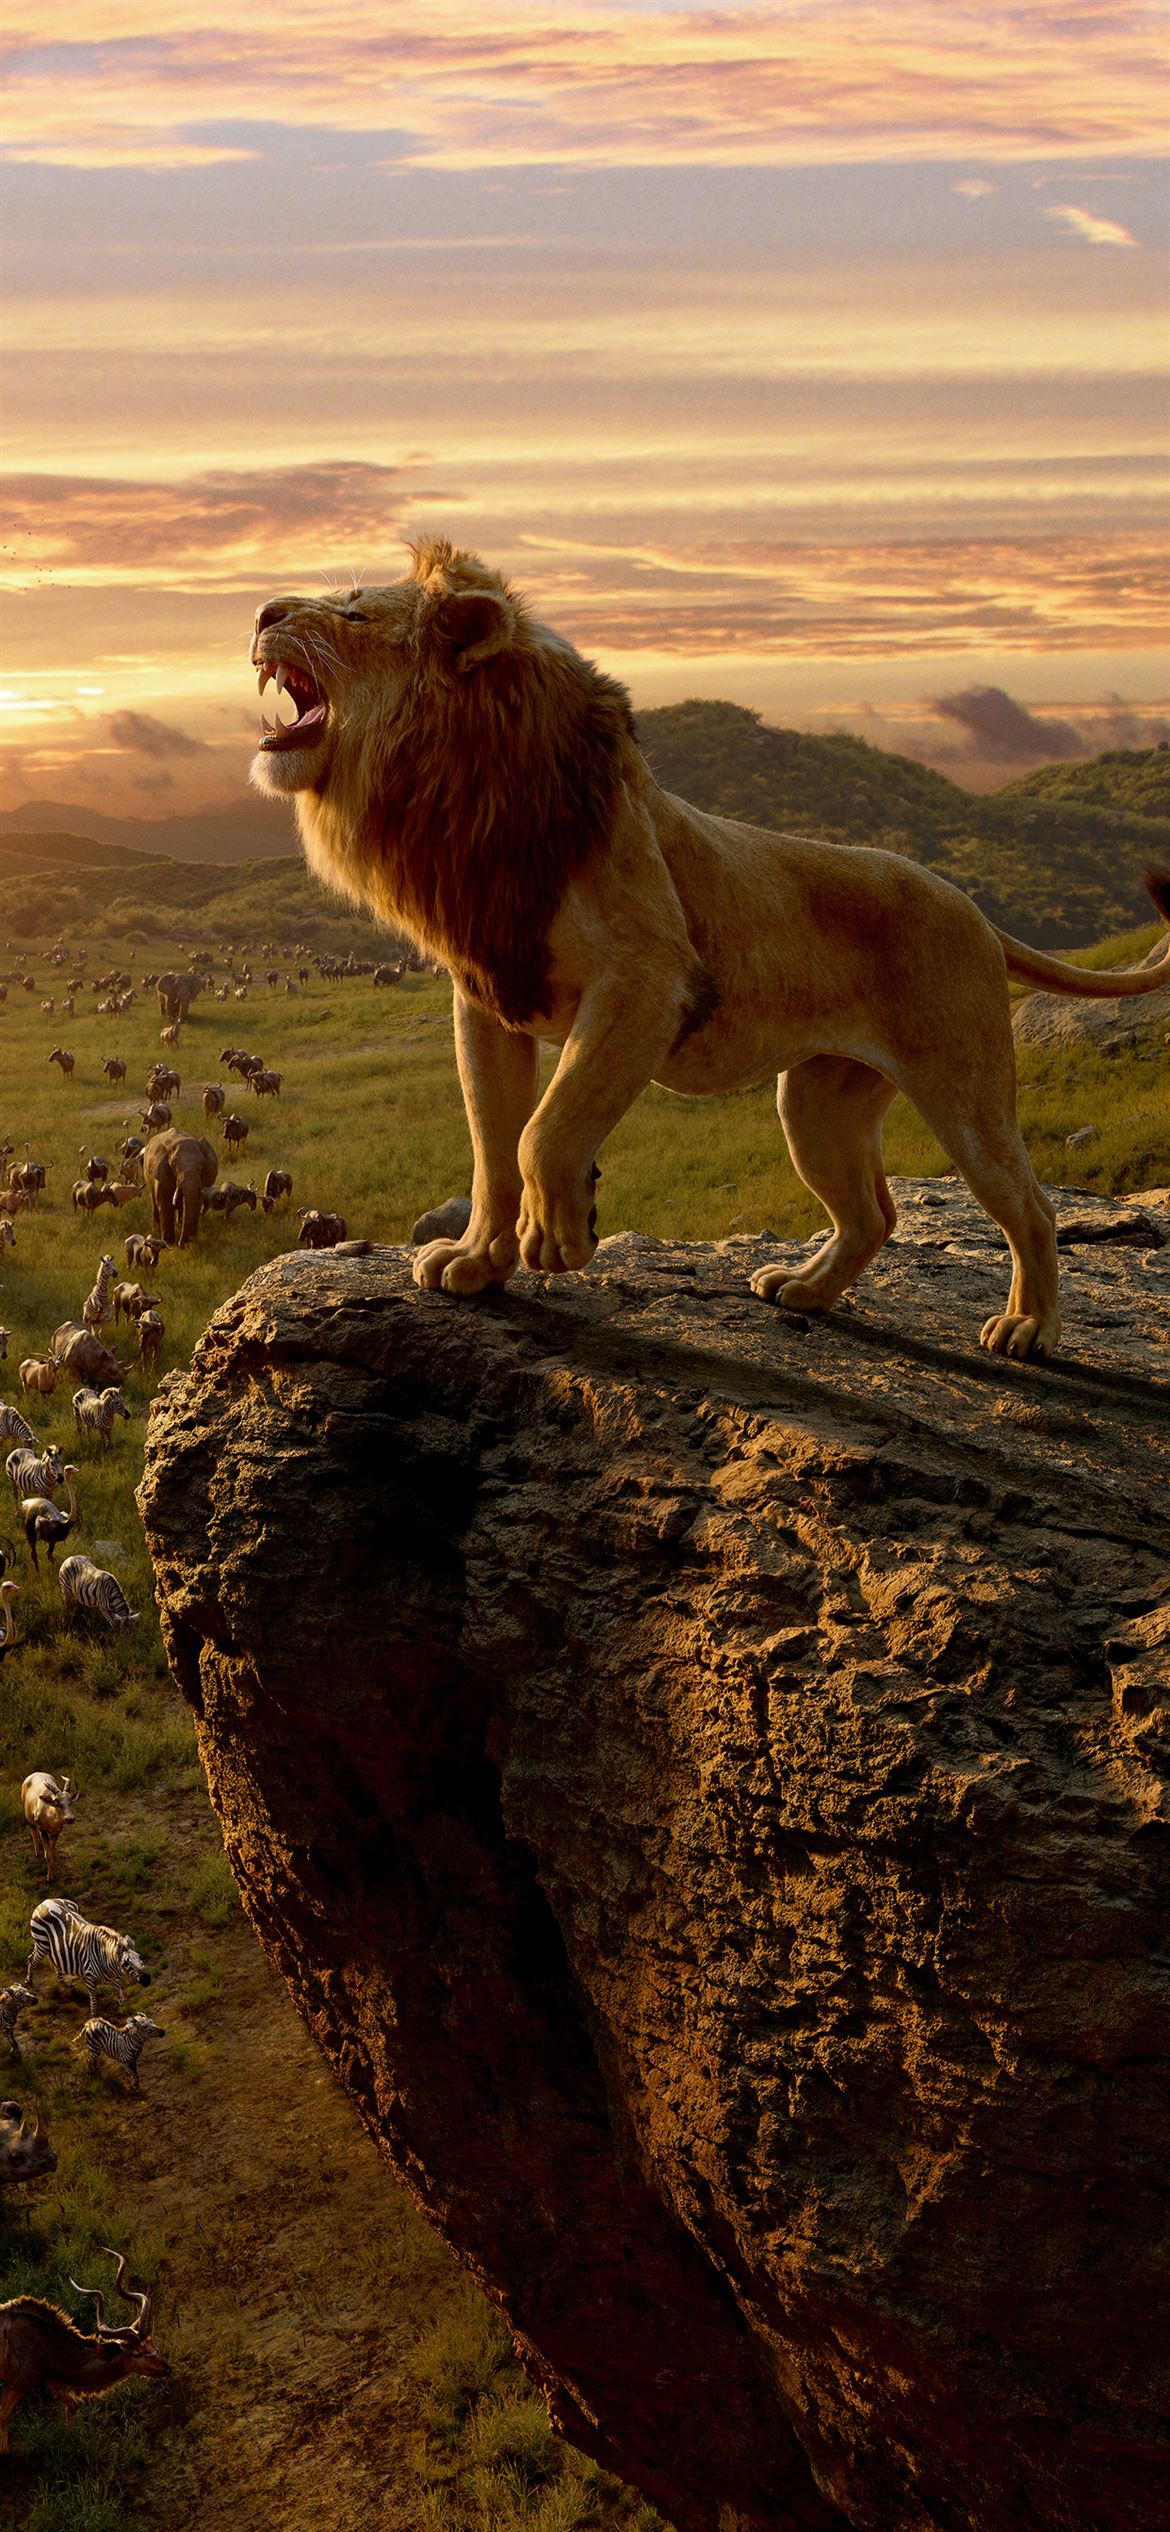 download the new version for ios The Lion King